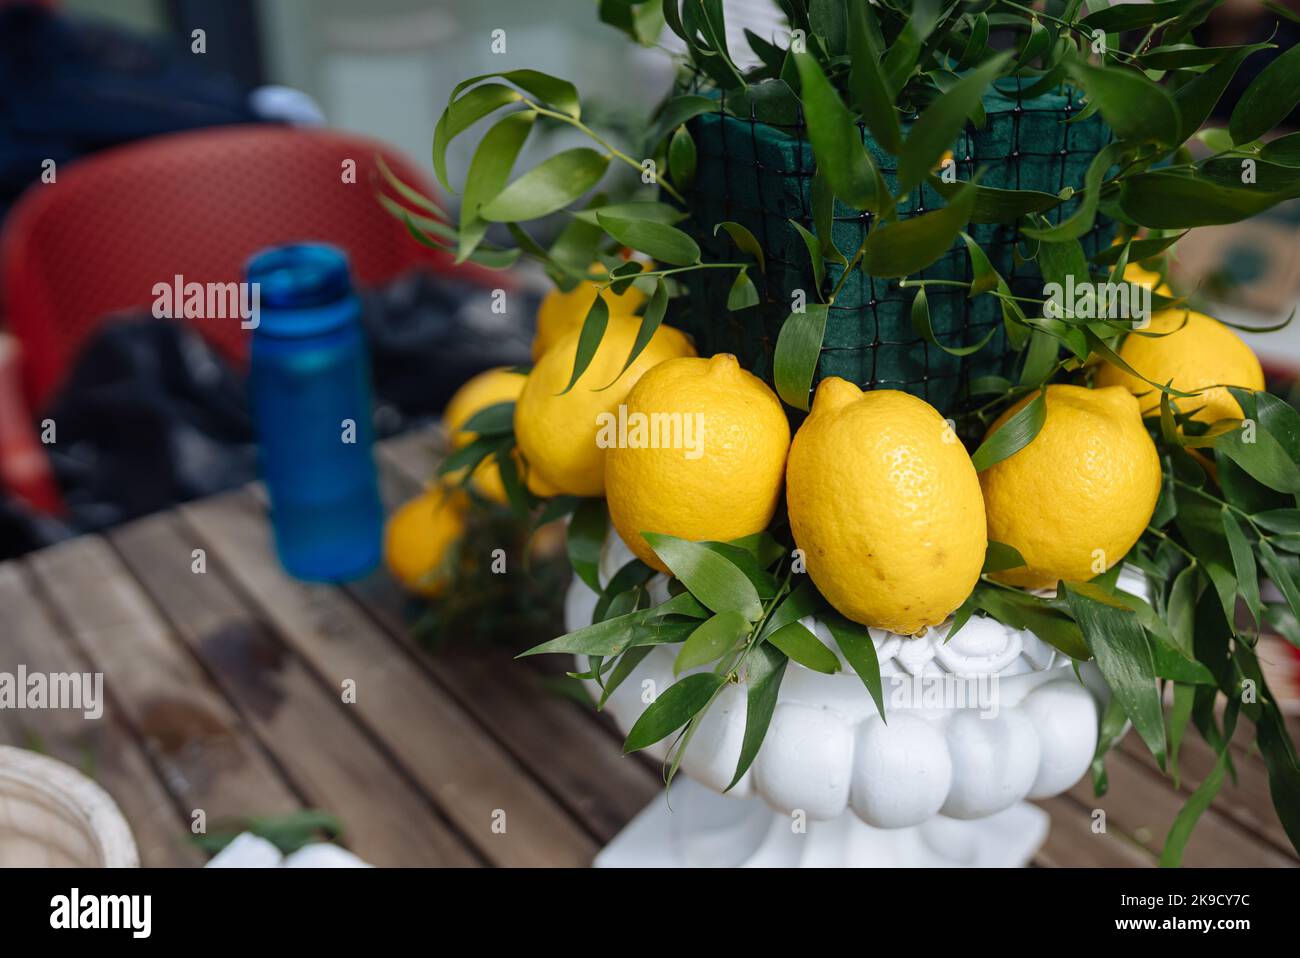 Wedding composition with green leaves and lemons, close view Stock Photo